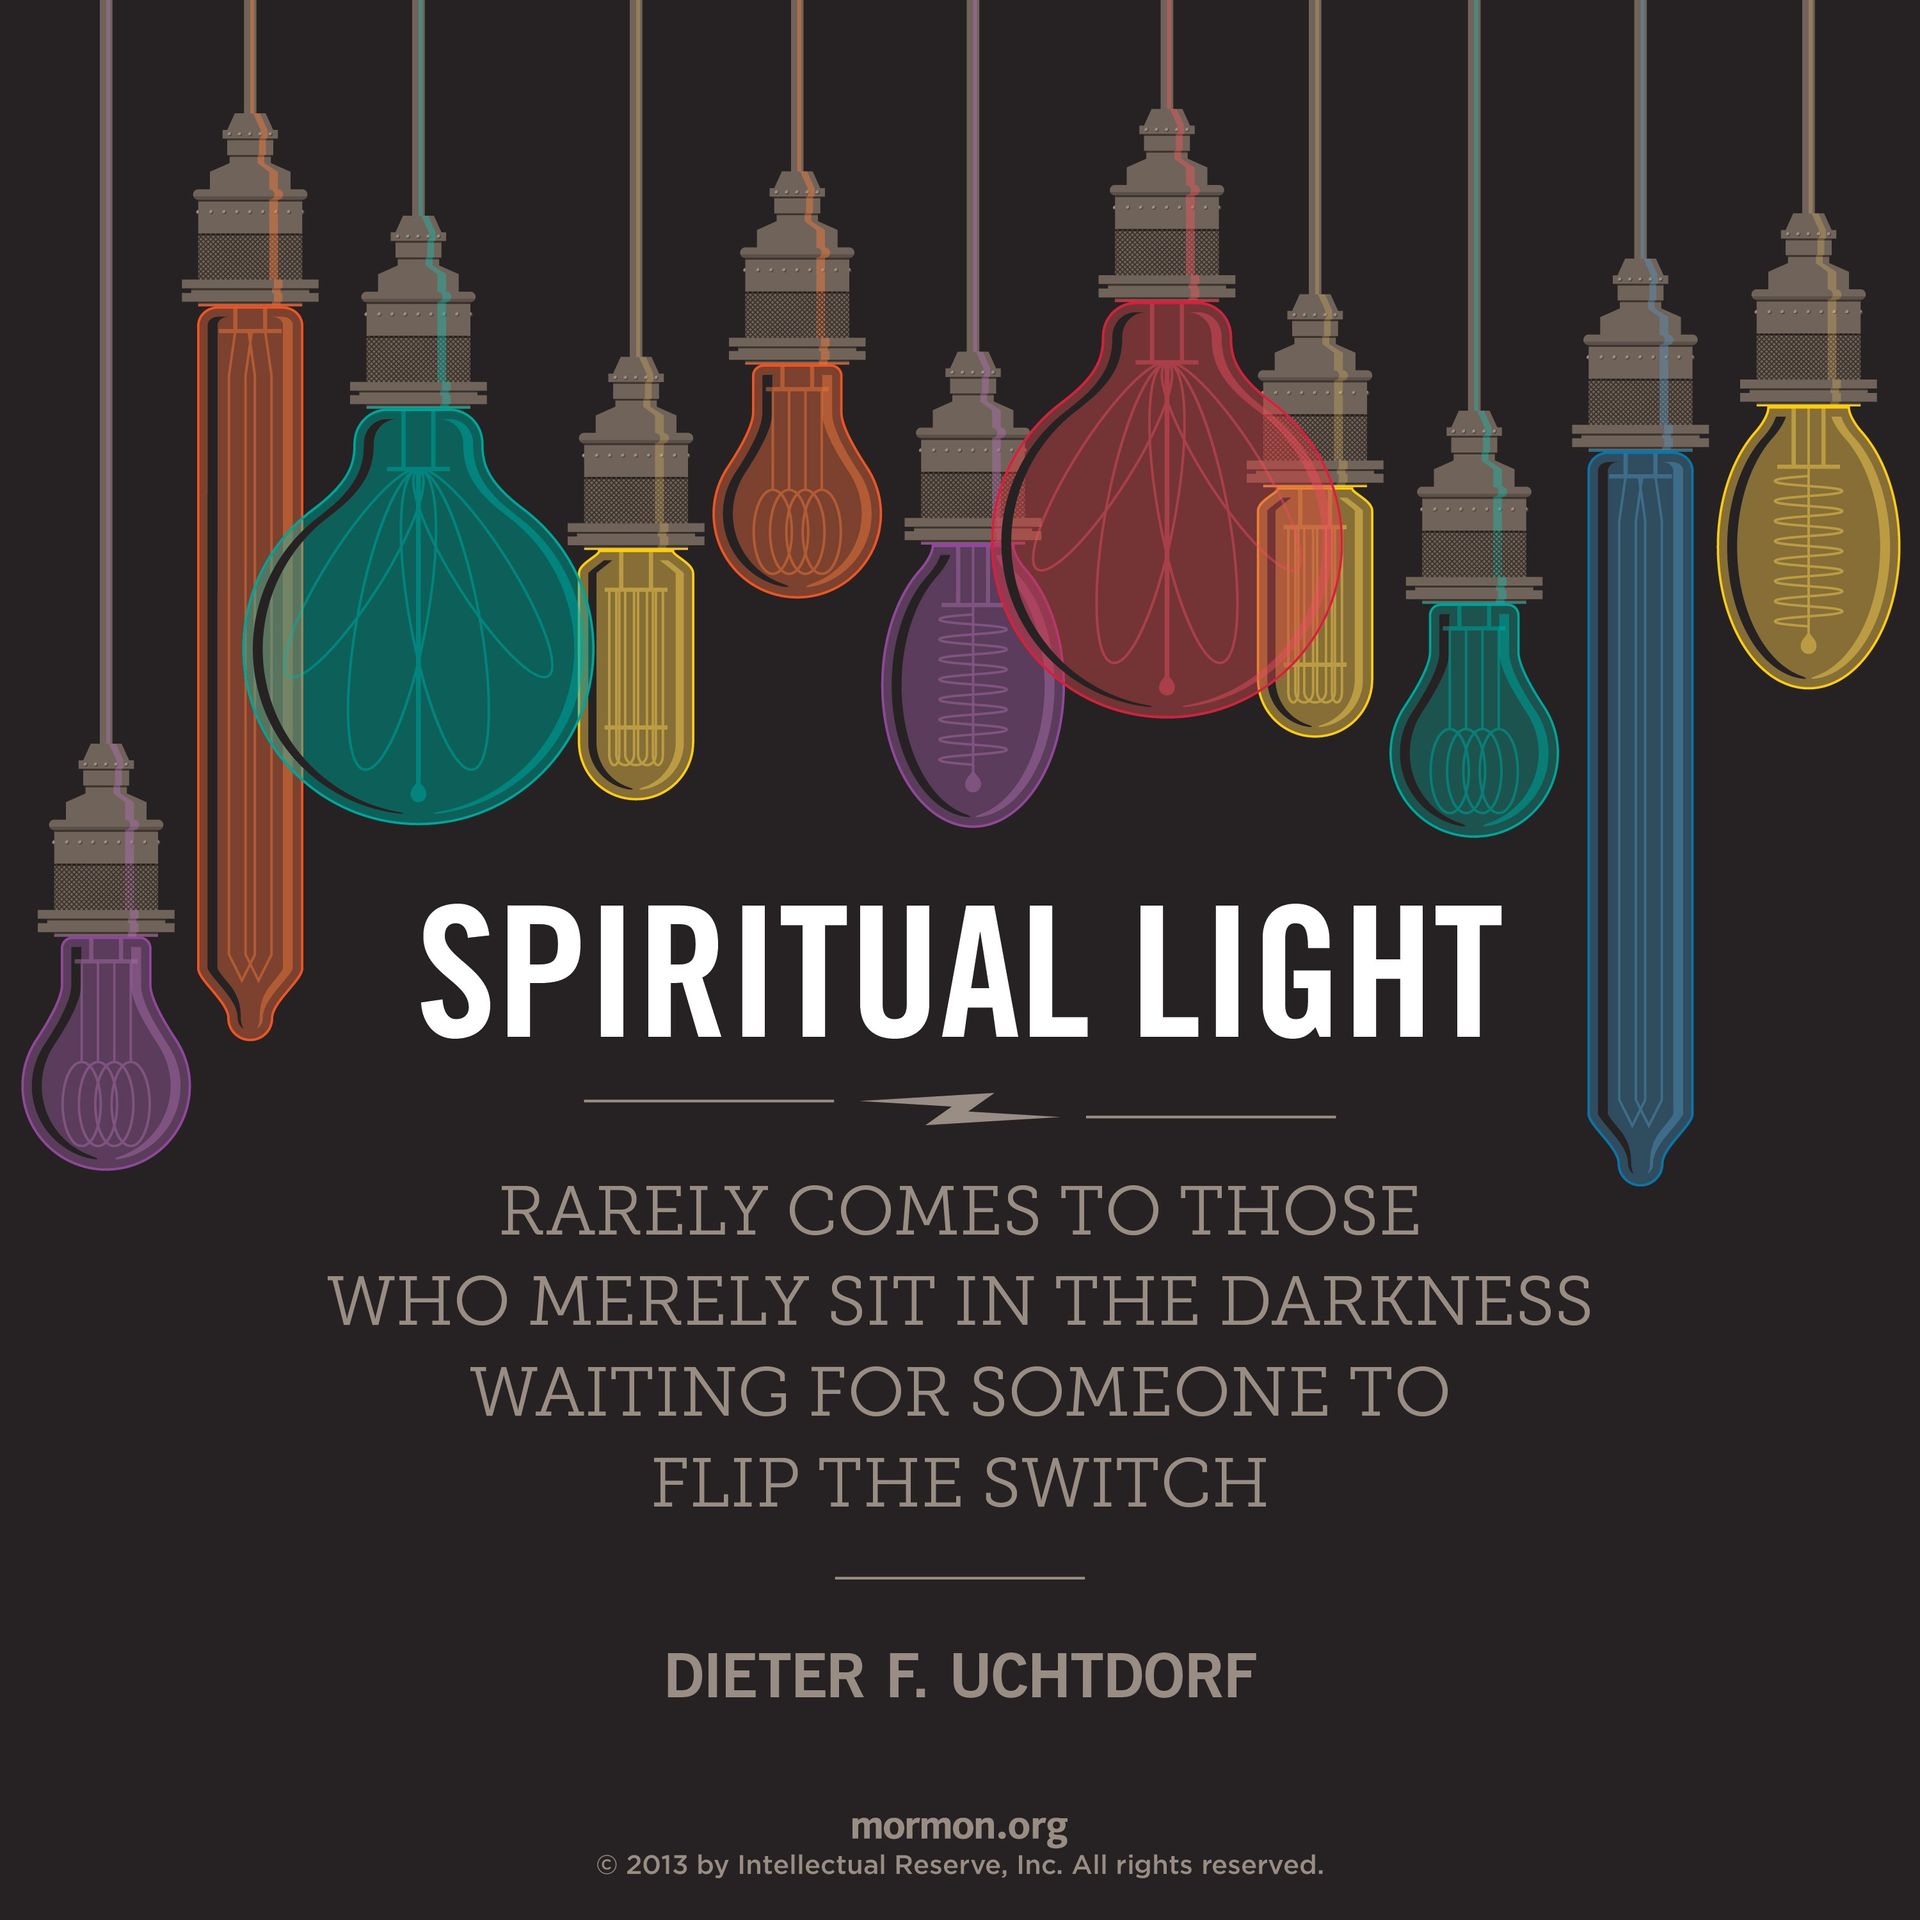 “Spiritual light rarely comes to those who merely sit in the darkness waiting for someone to flip the switch.”—President Dieter F. Uchtdorf, “The Hope of God’s Light”